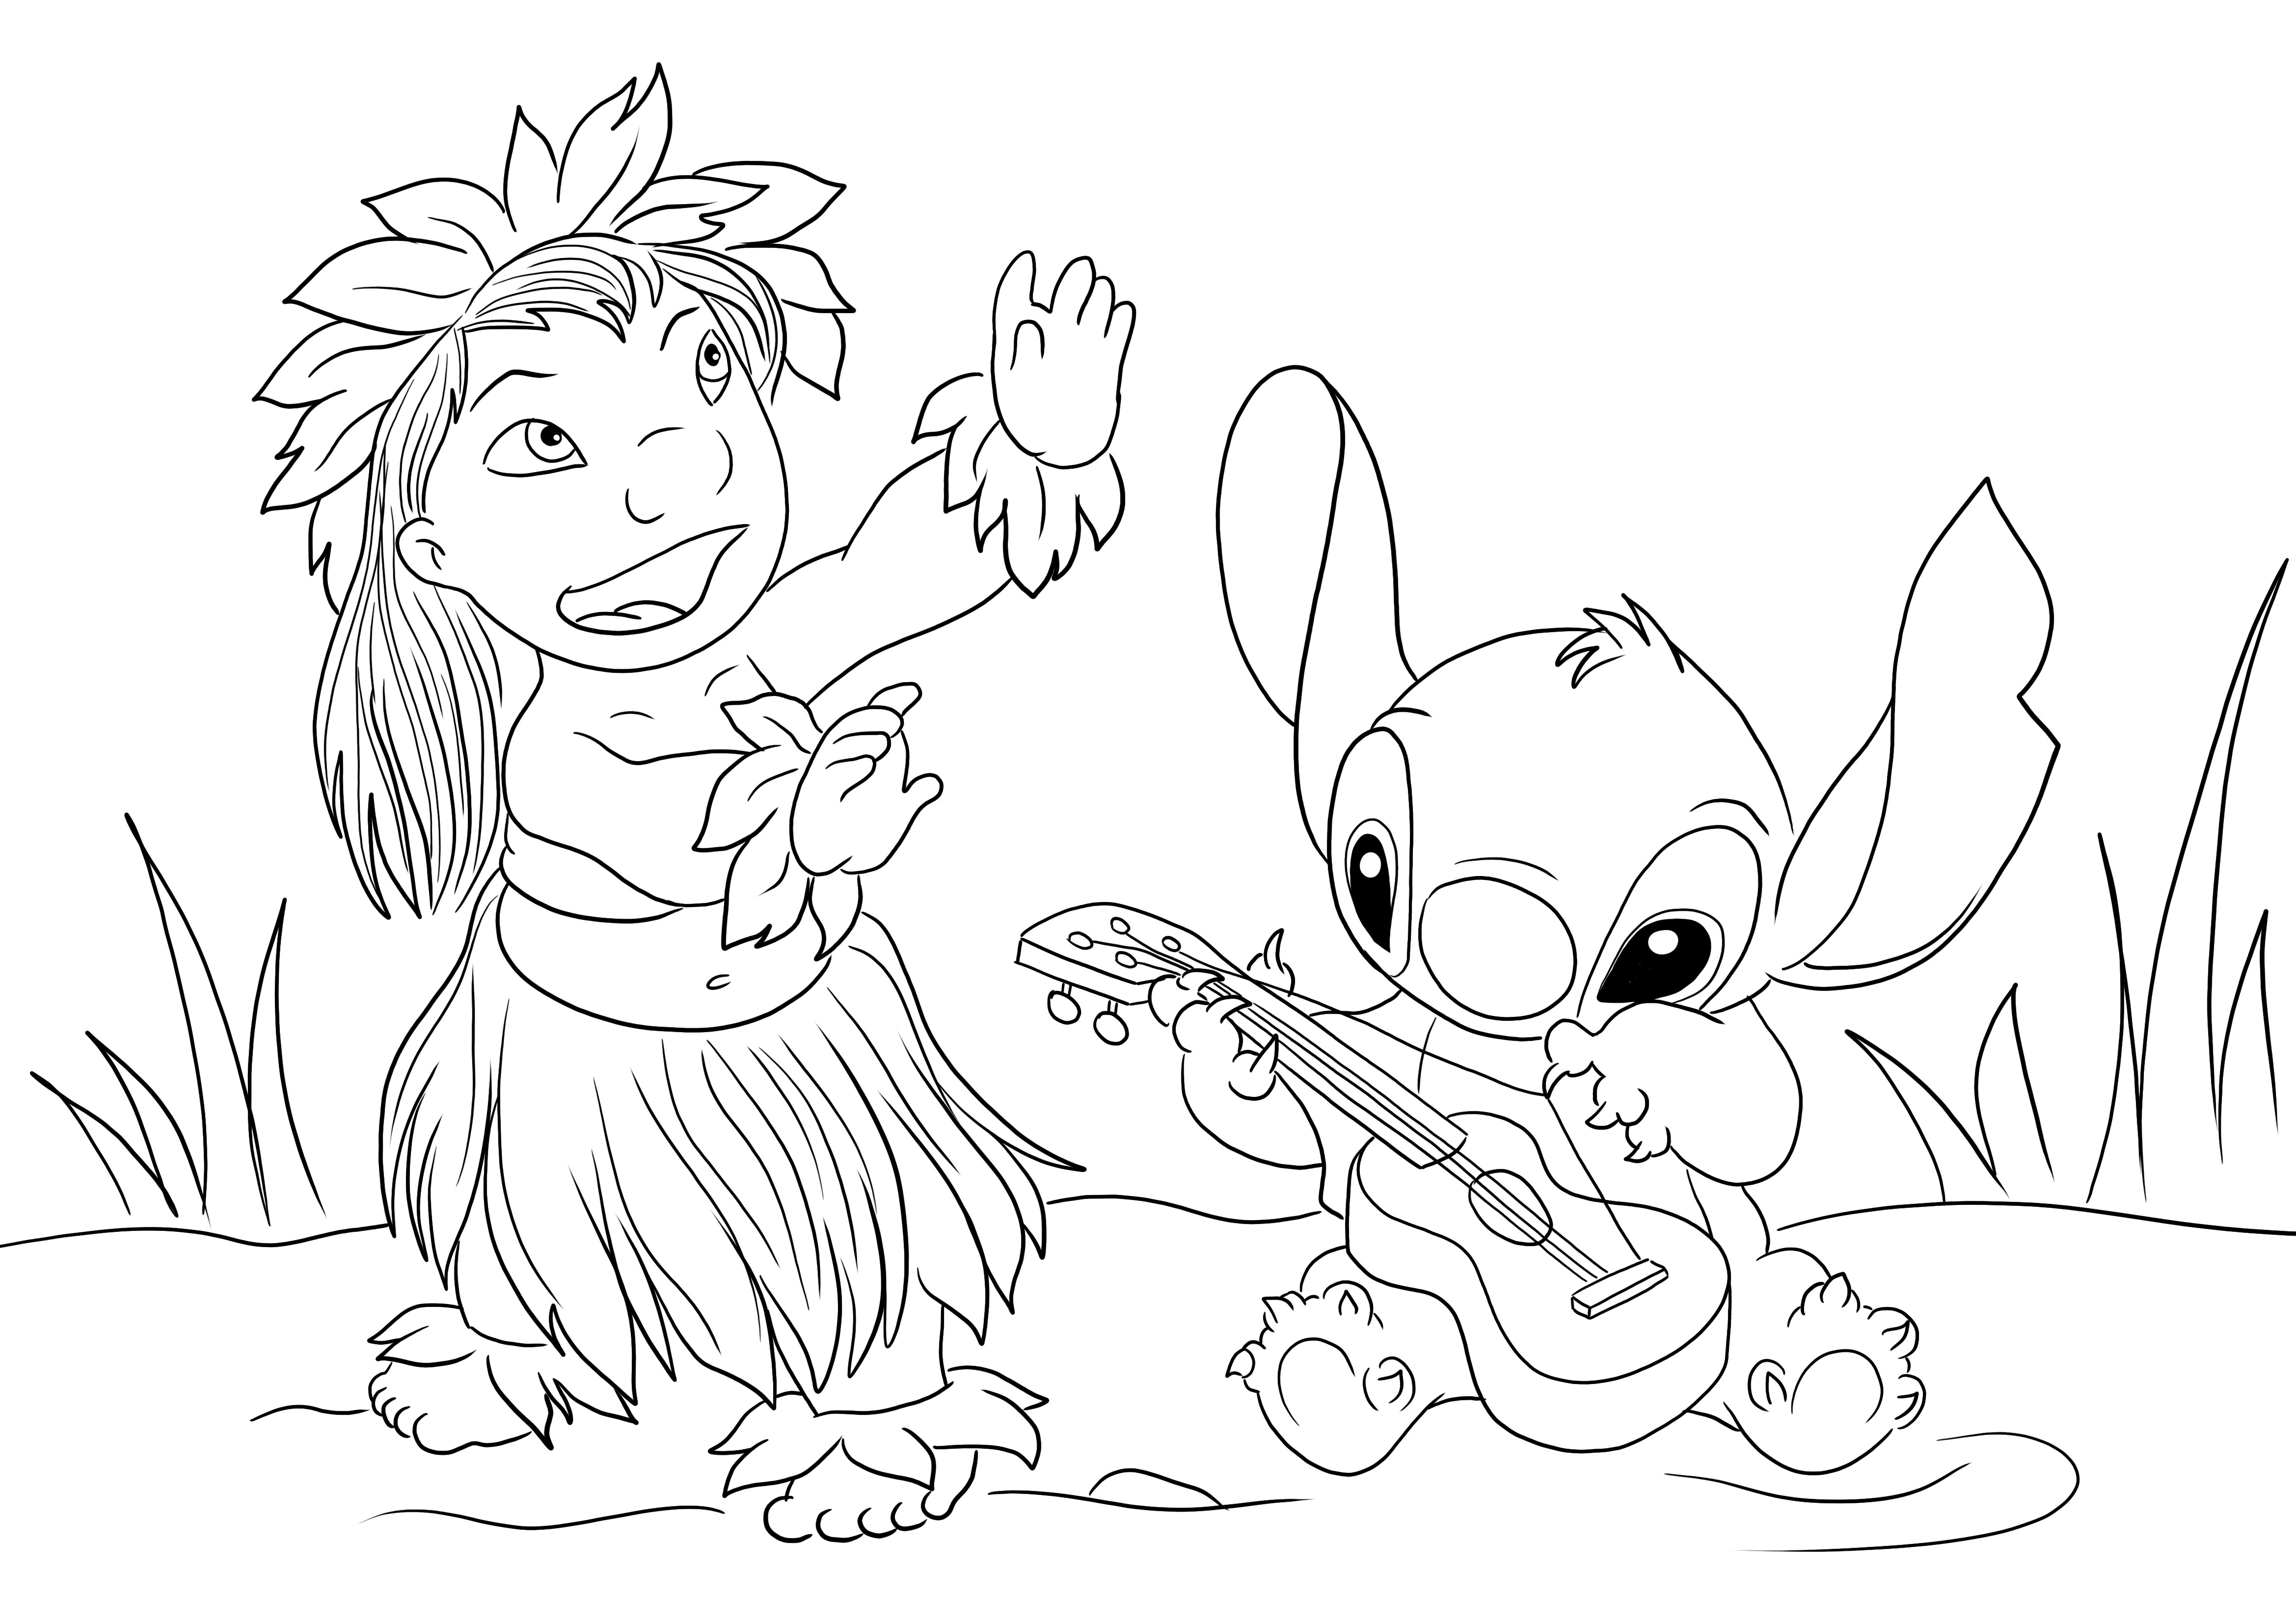 Lilo&Stitch dancing print free and color for kids to have fun together